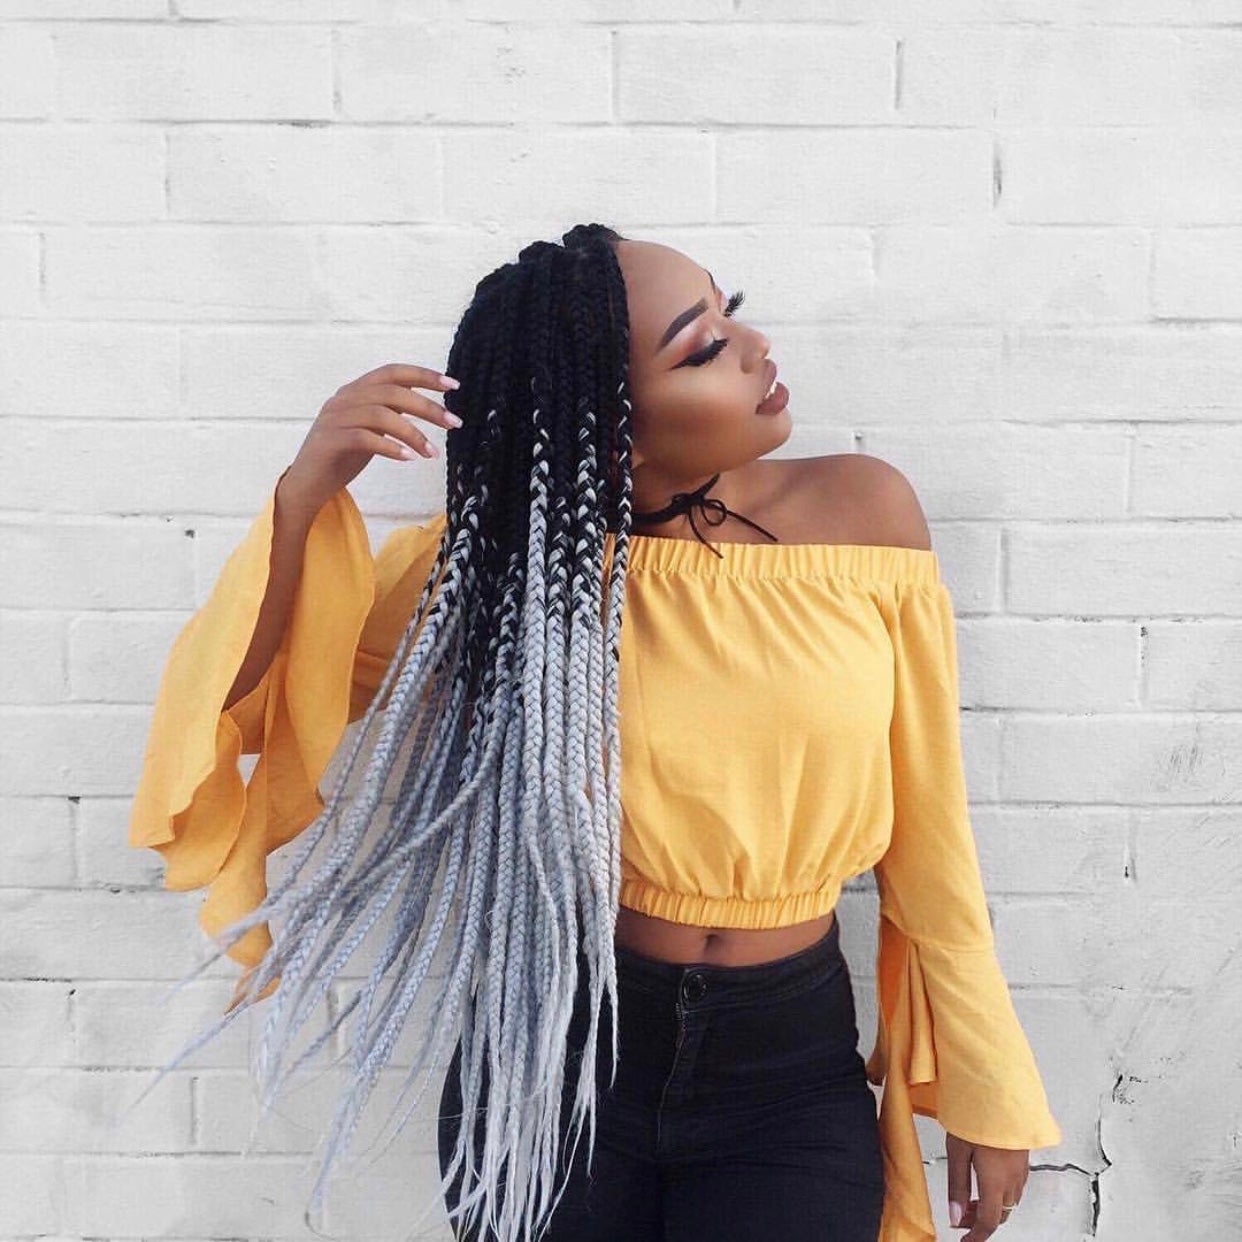 Amazing Ombre Braids Like You've Never Seen Them Before | Essence